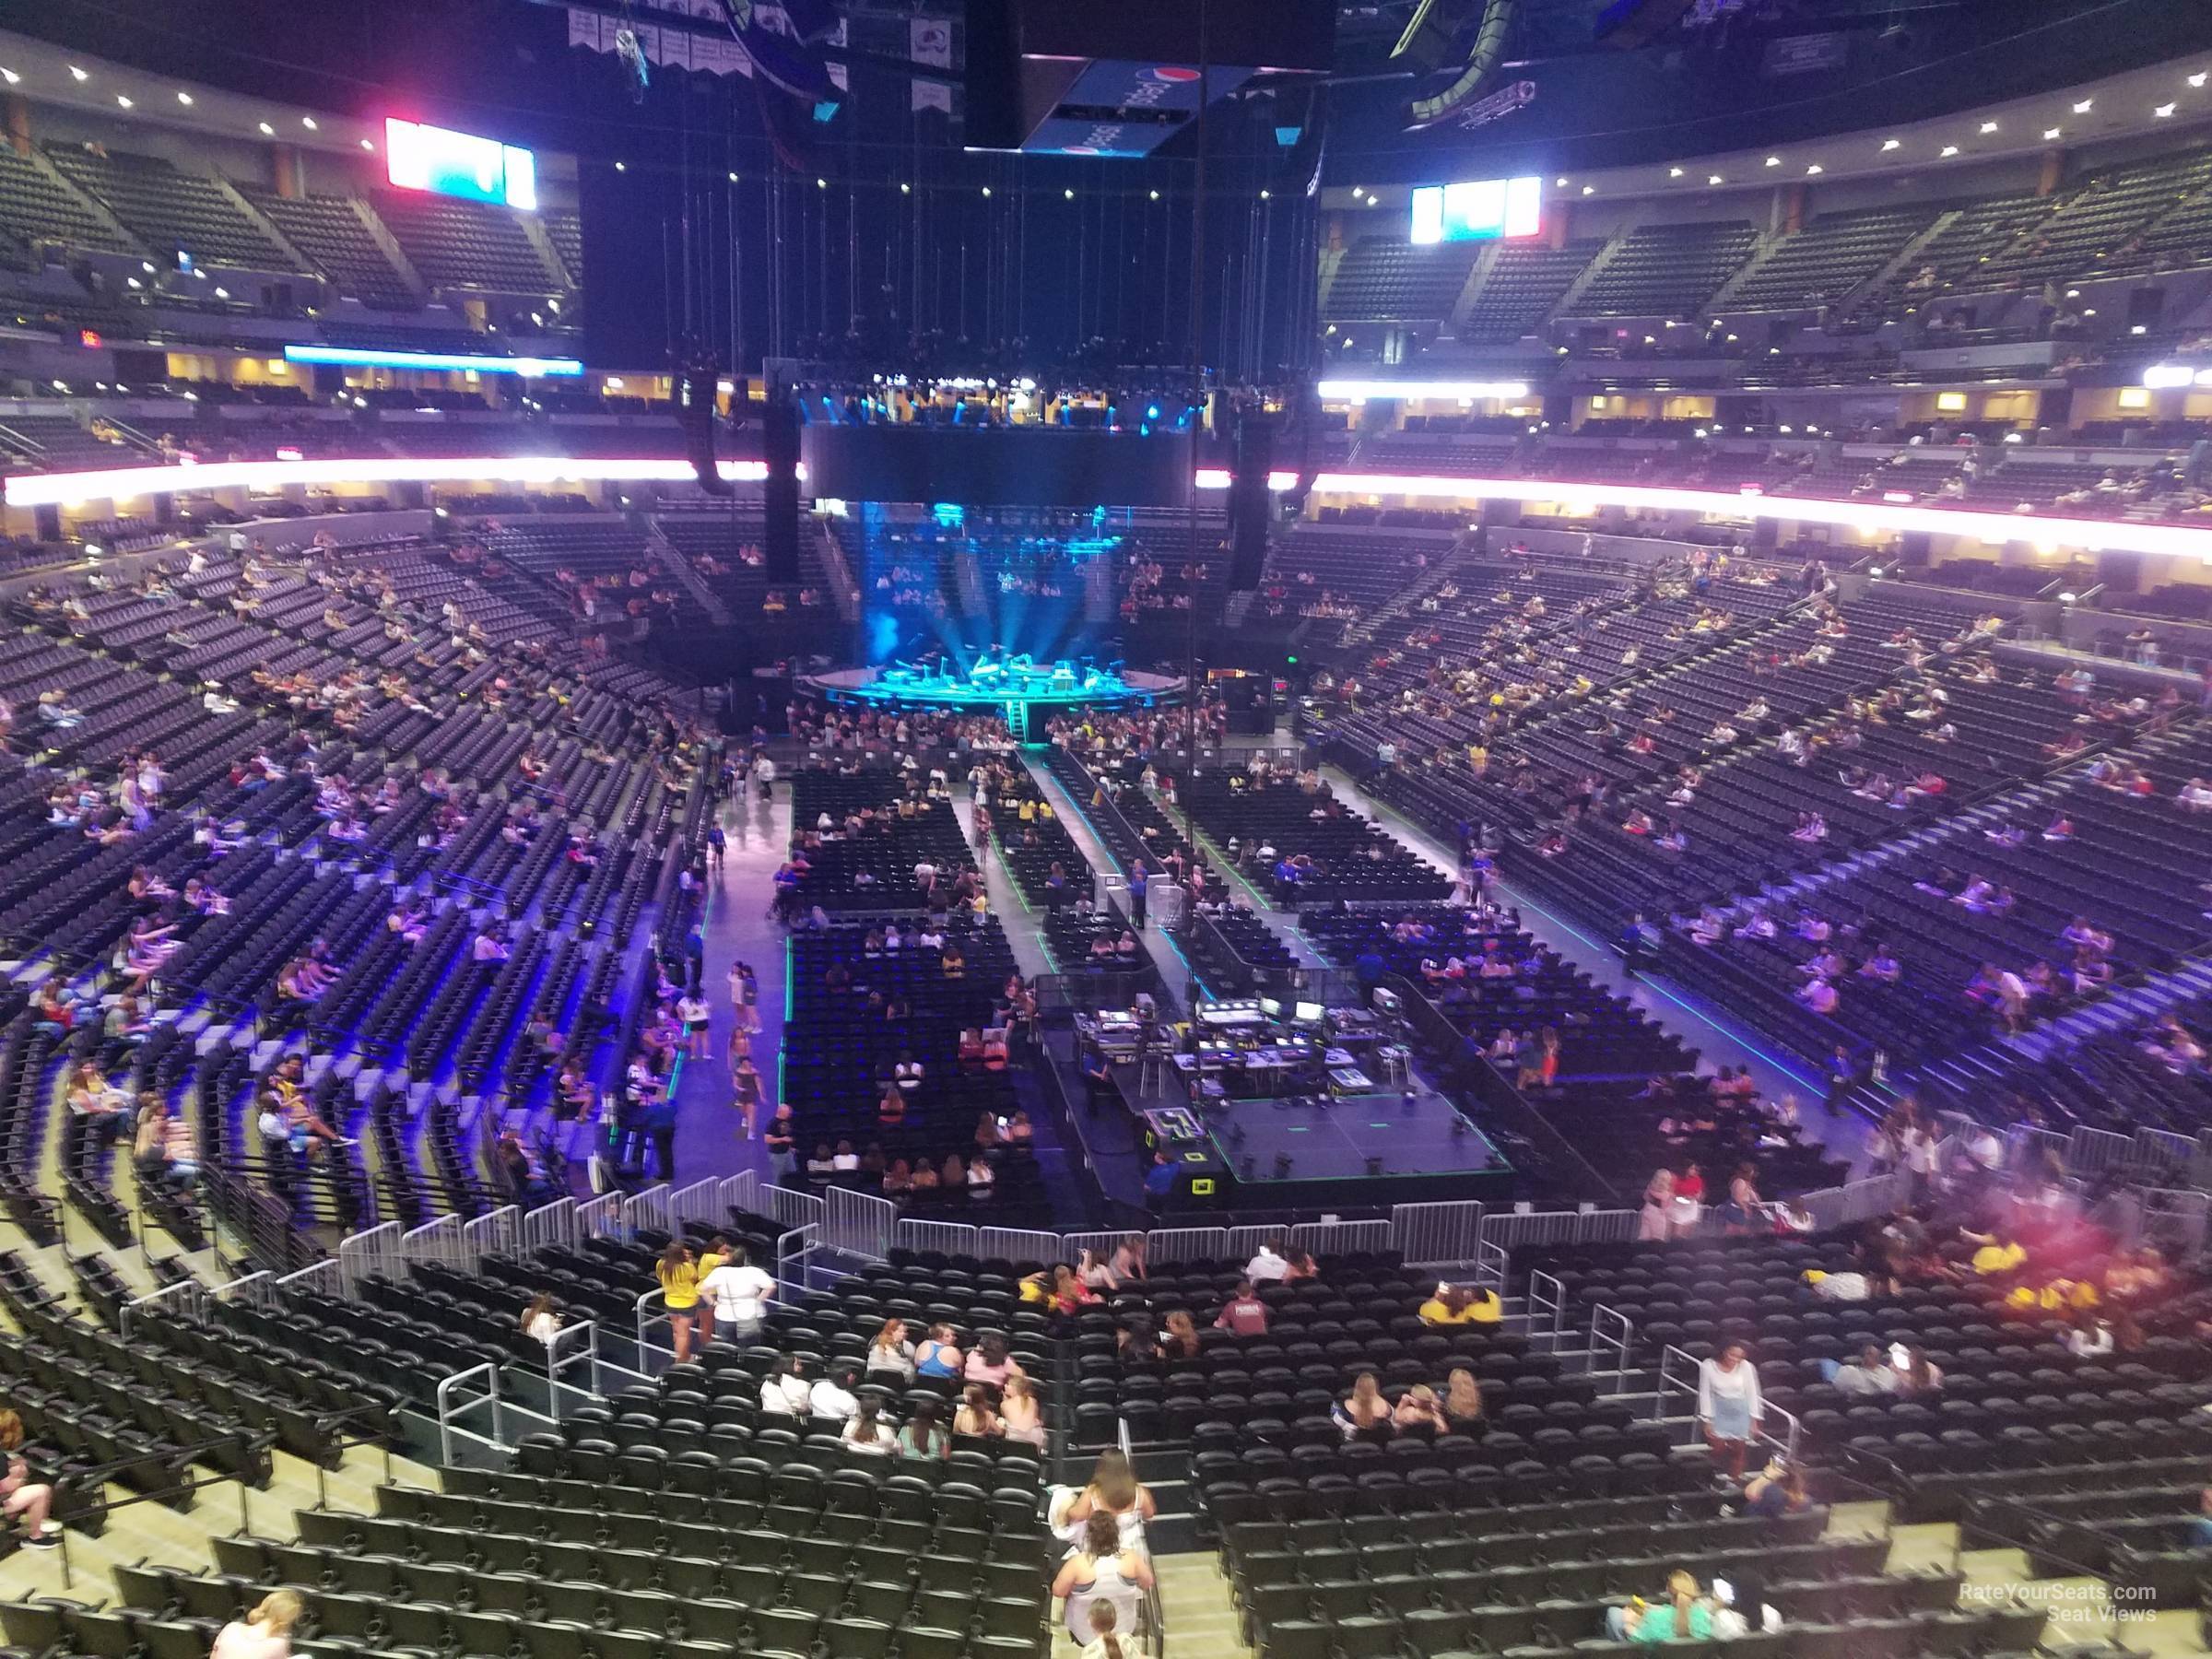 section 218, row 4 seat view  for concert - ball arena